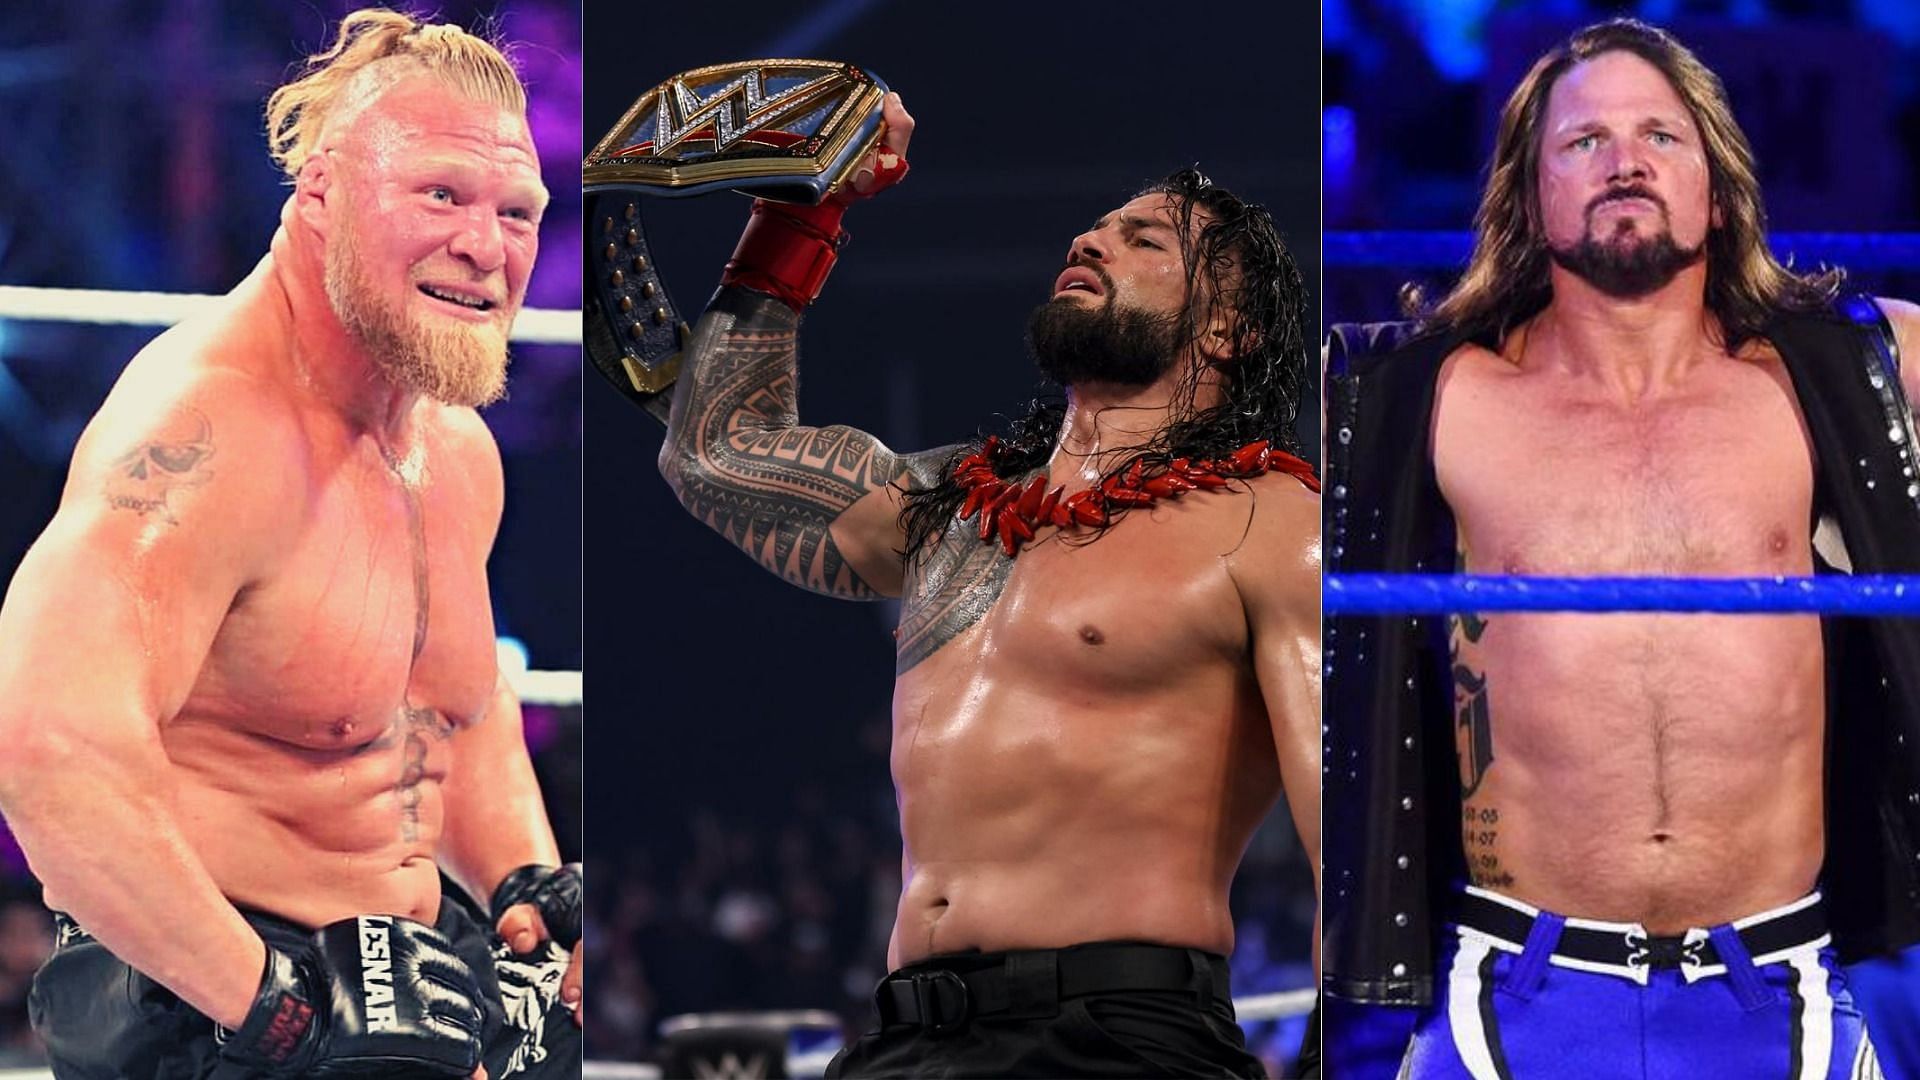 Brock Lesnar (left), Roman Reigns (middle), and AJ Styles (right)